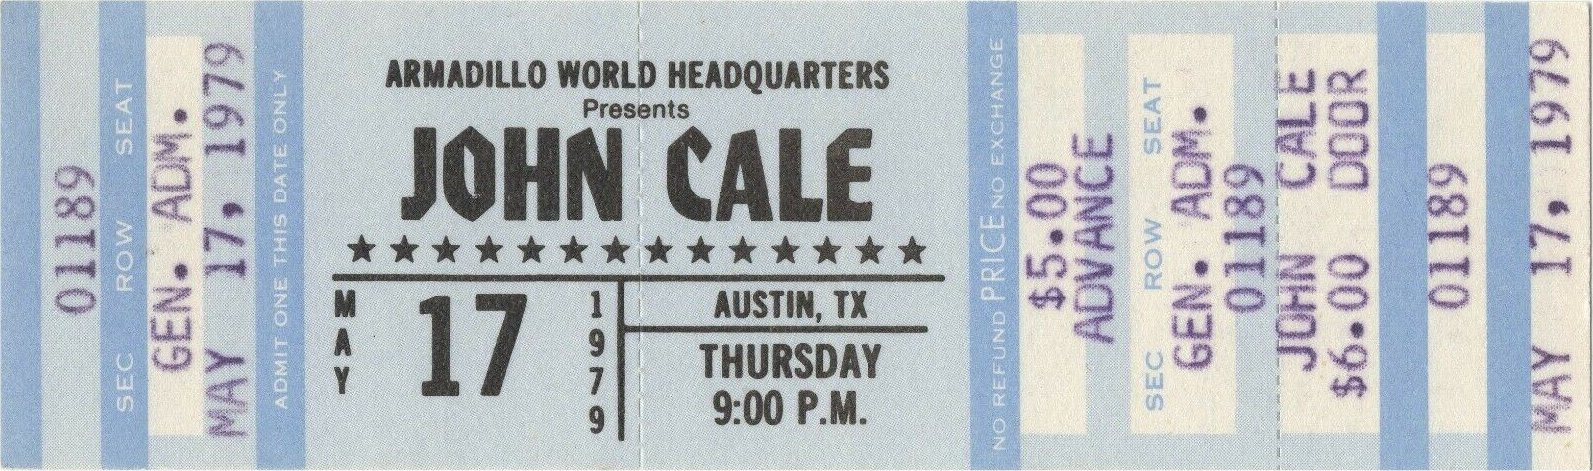 Early Double Trouble Ticket Stub